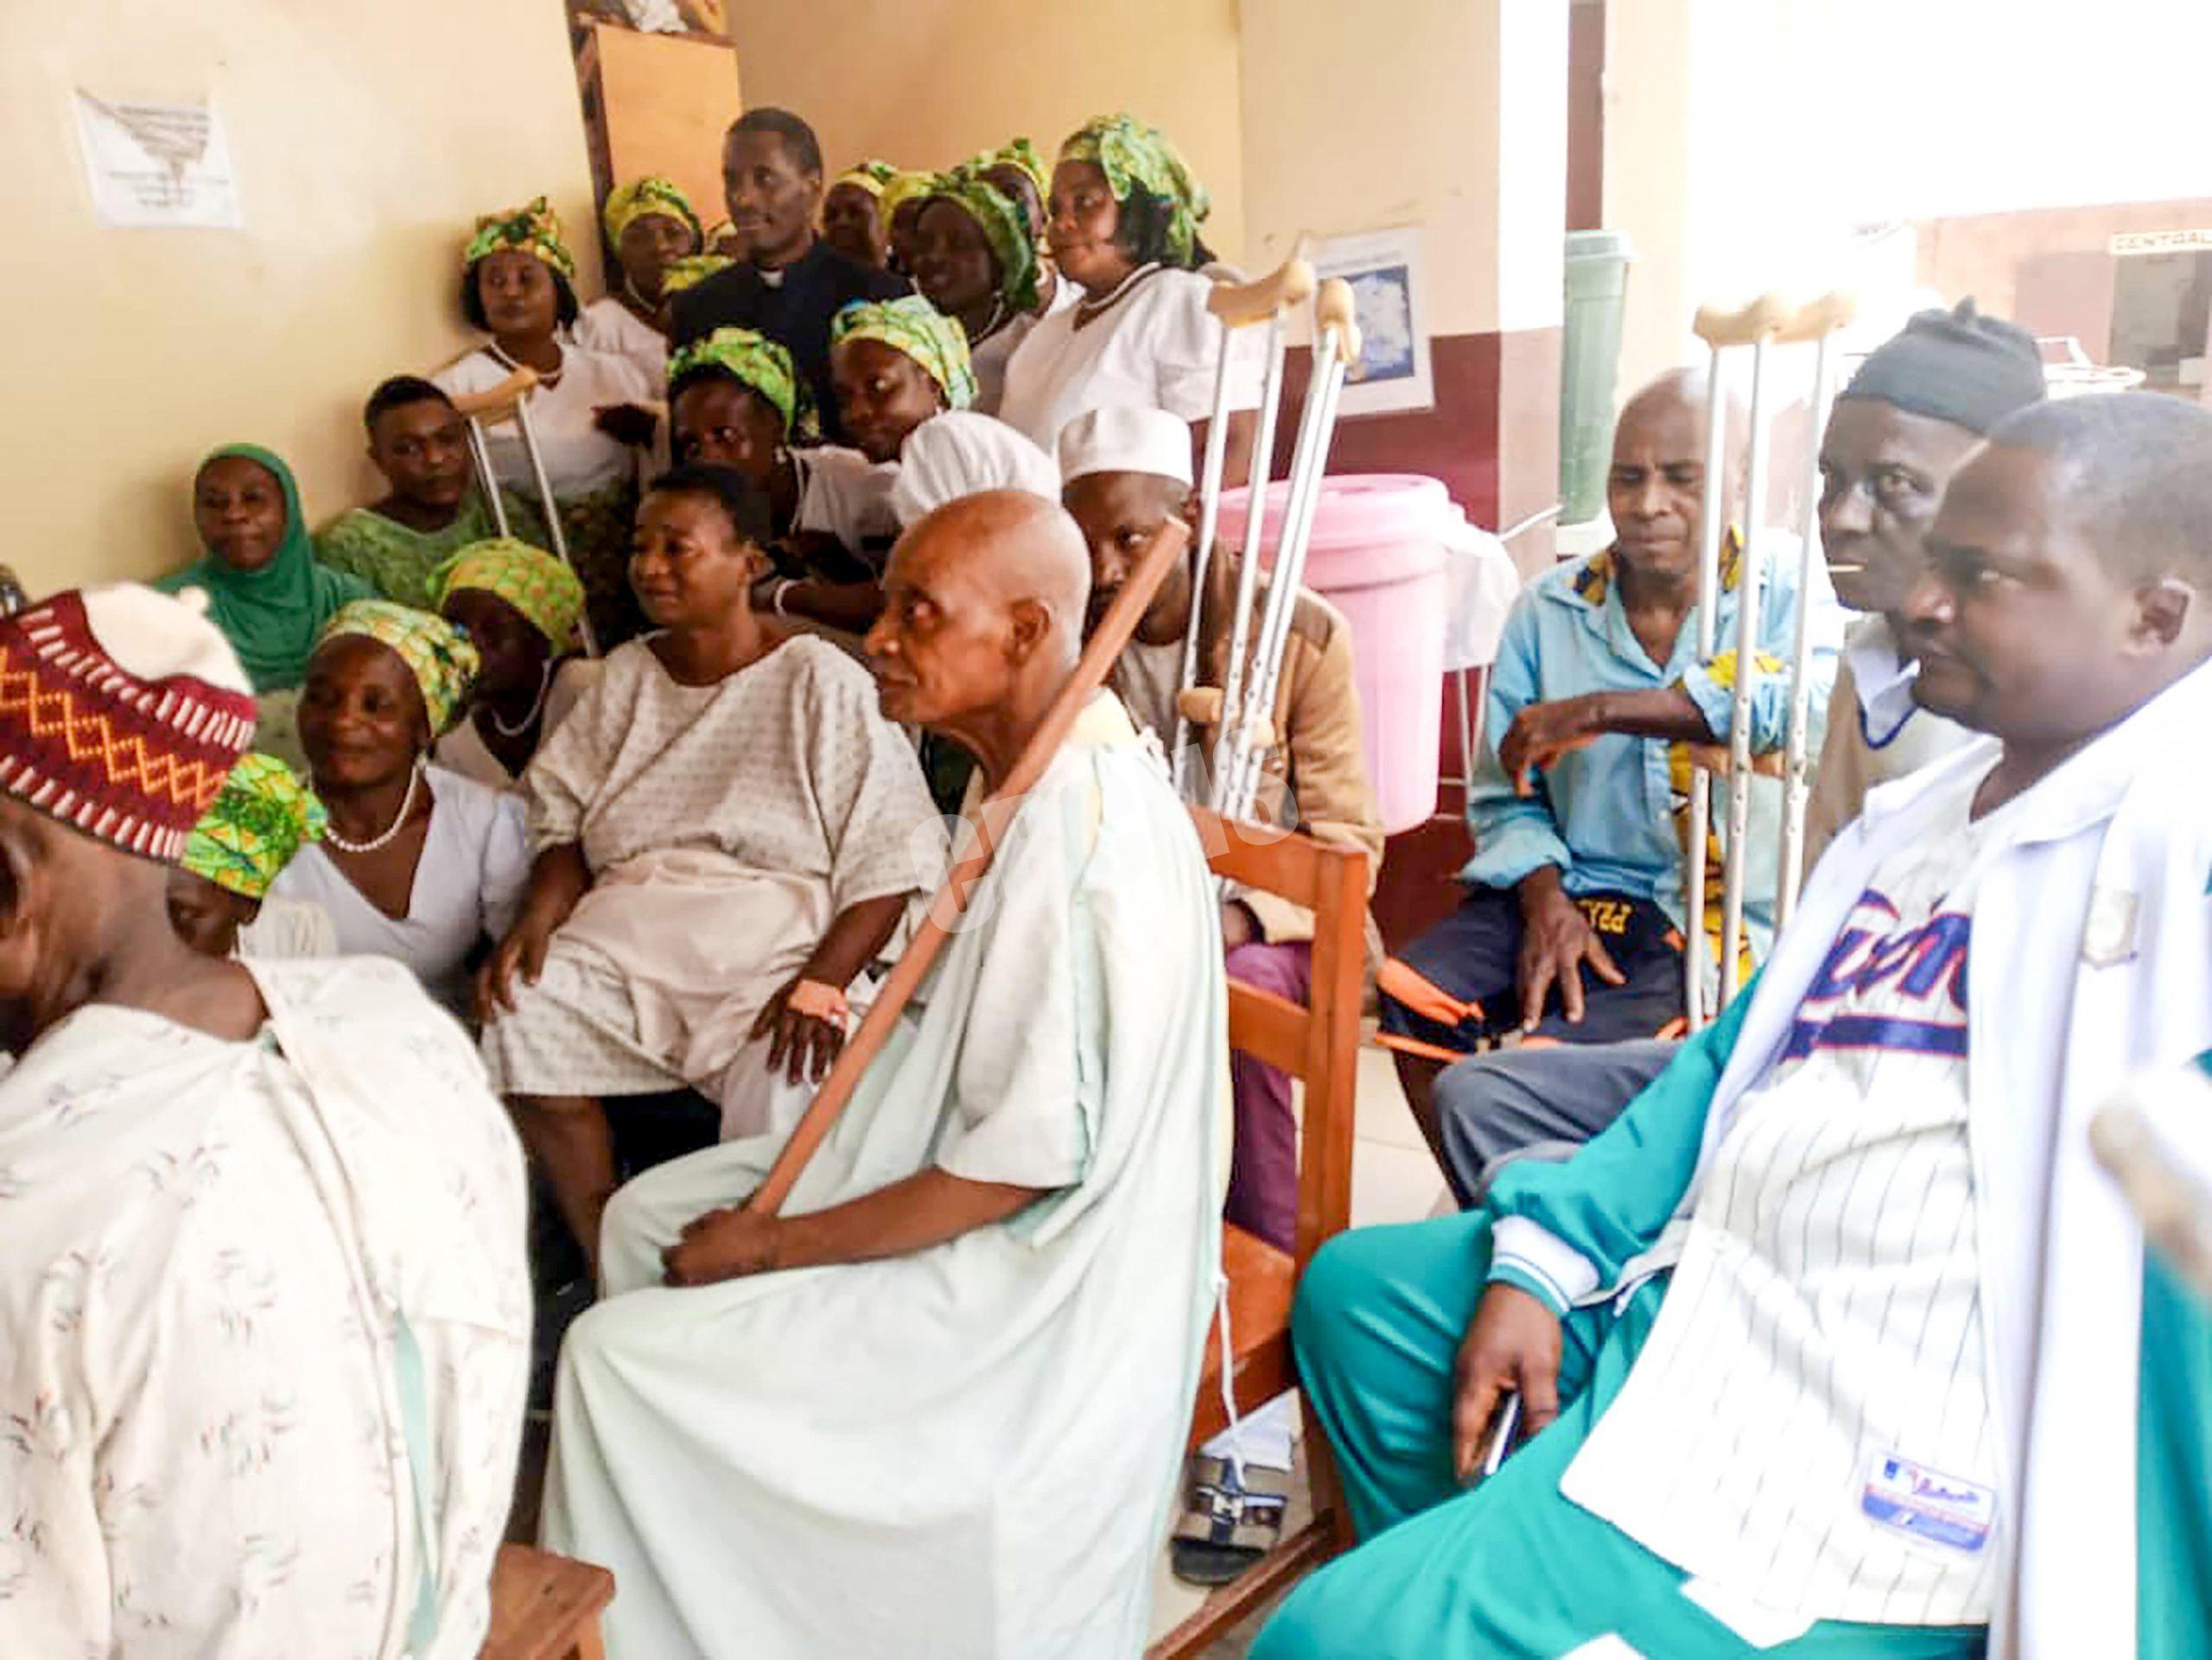 Patients of the Wound Care wards came out to thank the philanthropic endeavores of the Ndu Field Women